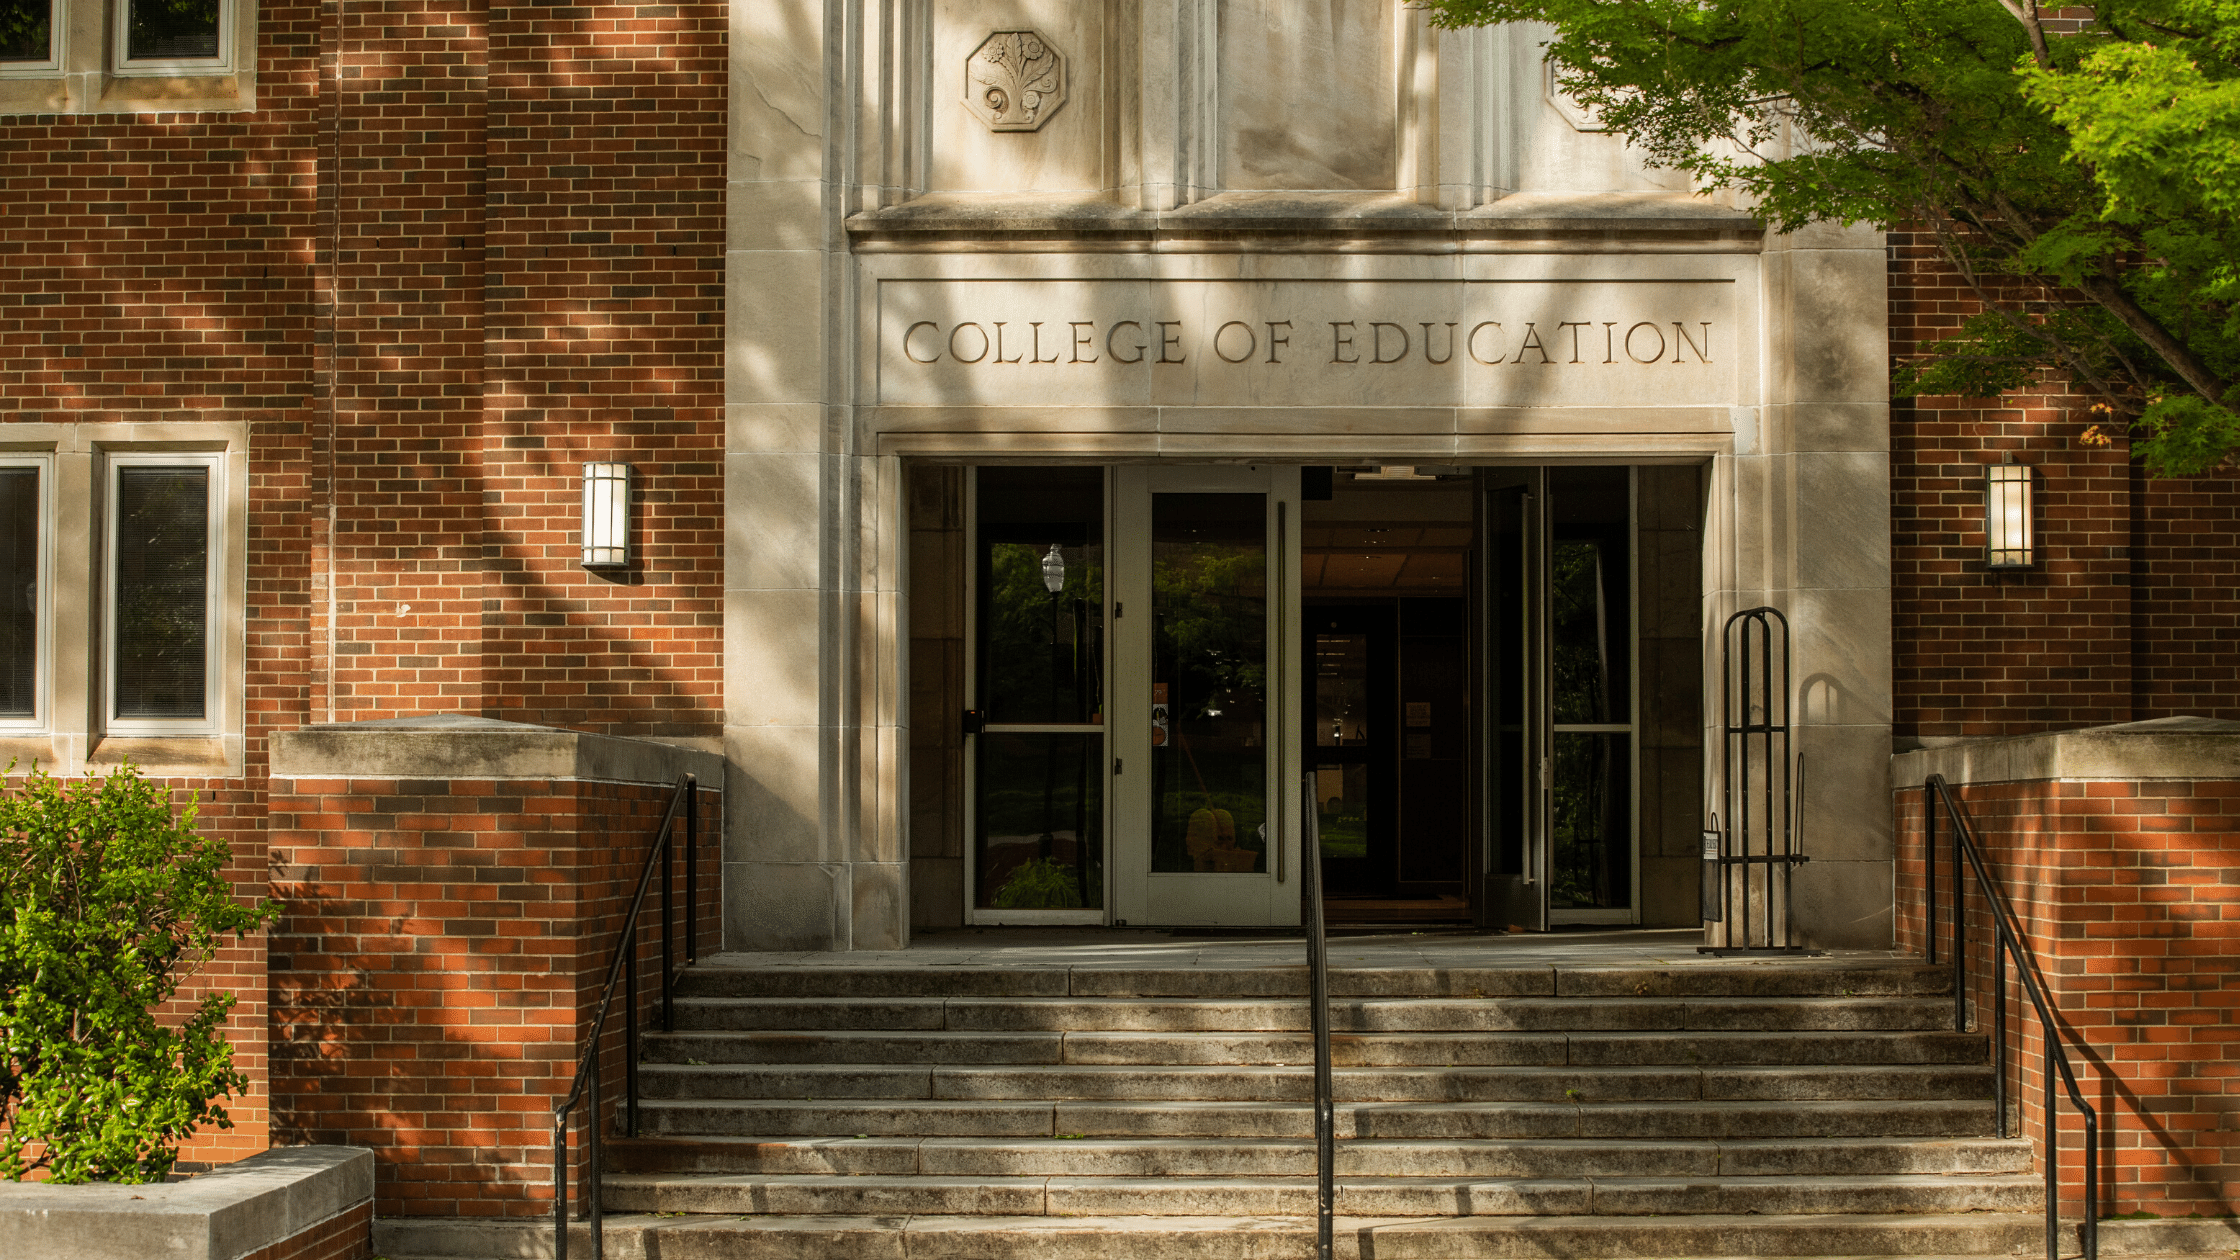 College of Education front steps